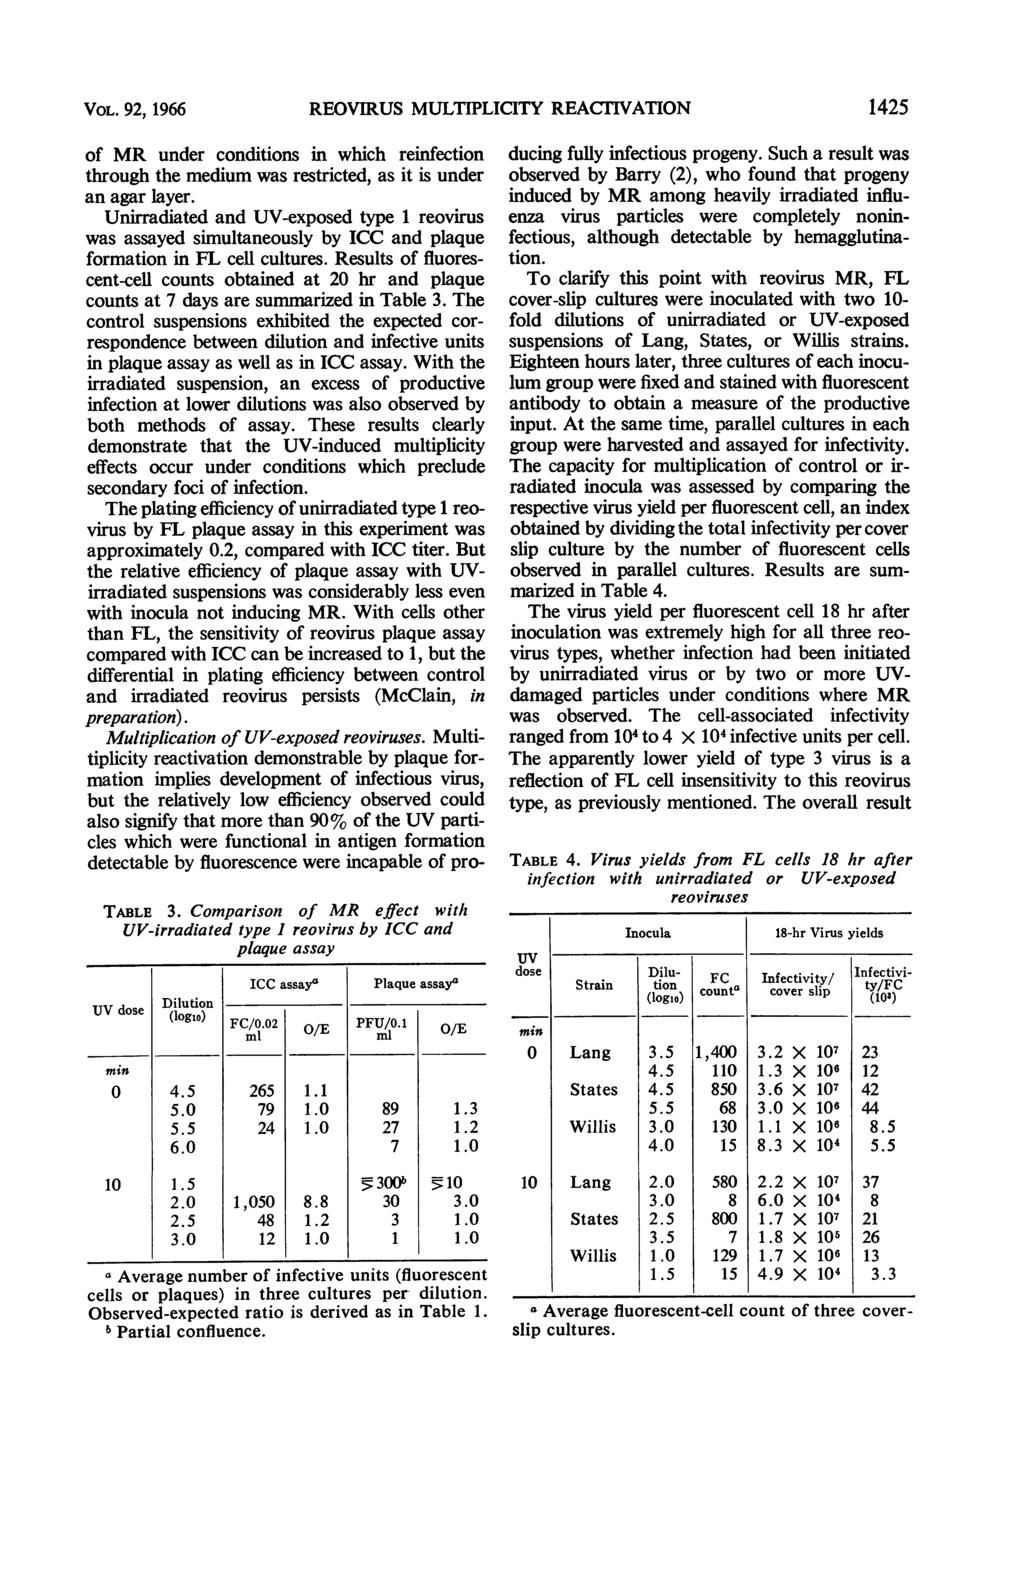 VOL. 92, 1966 REOVIRUS MULTIPLICITY REACrIVATION of MR under conditions in which reinfection through the medium was restricted, as it is under an agar layer.